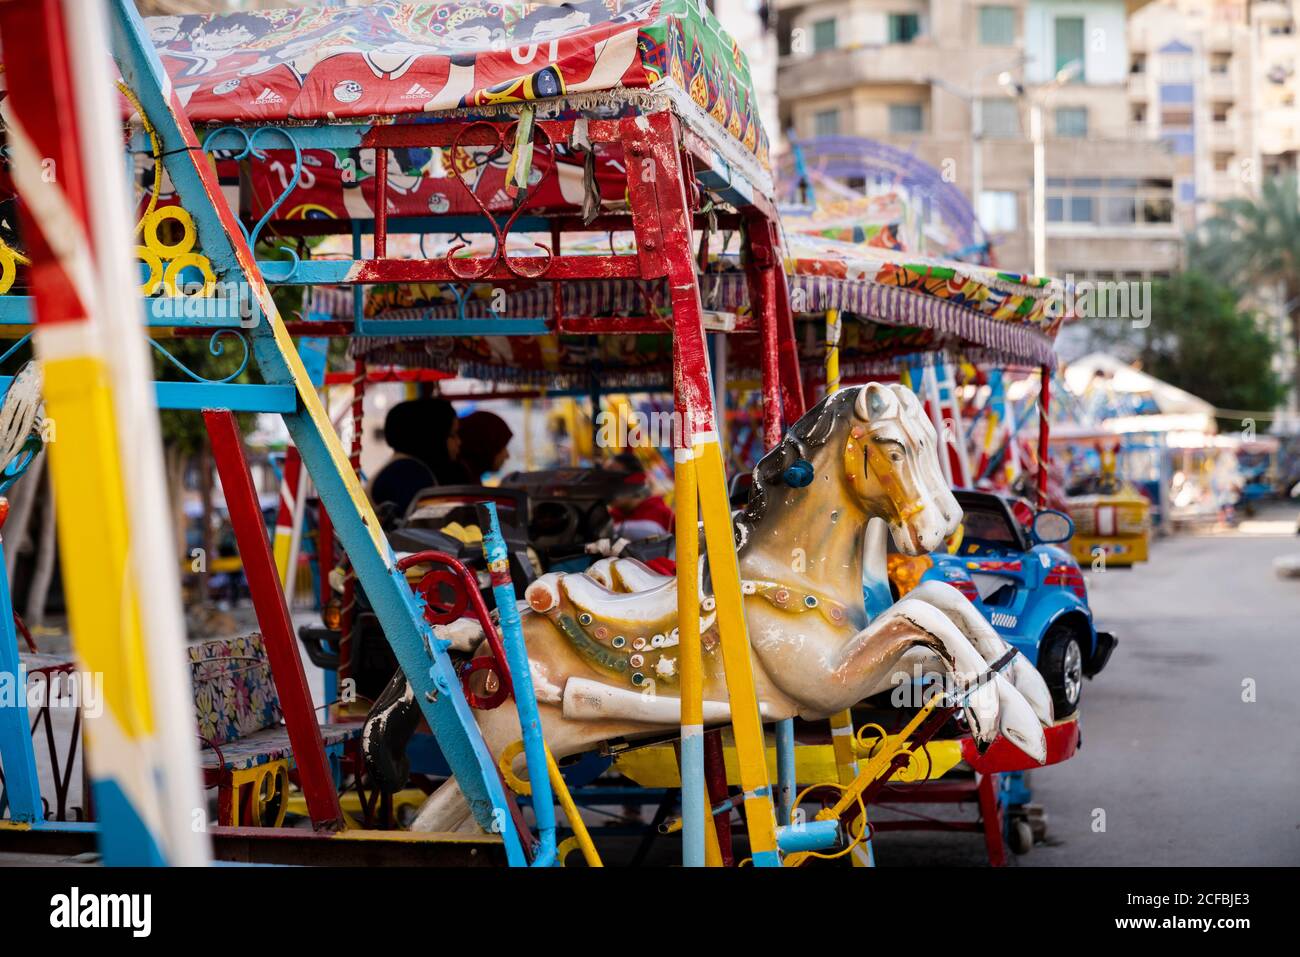 A free outdoor ride park for children in Alexandria, Egypt Stock Photo